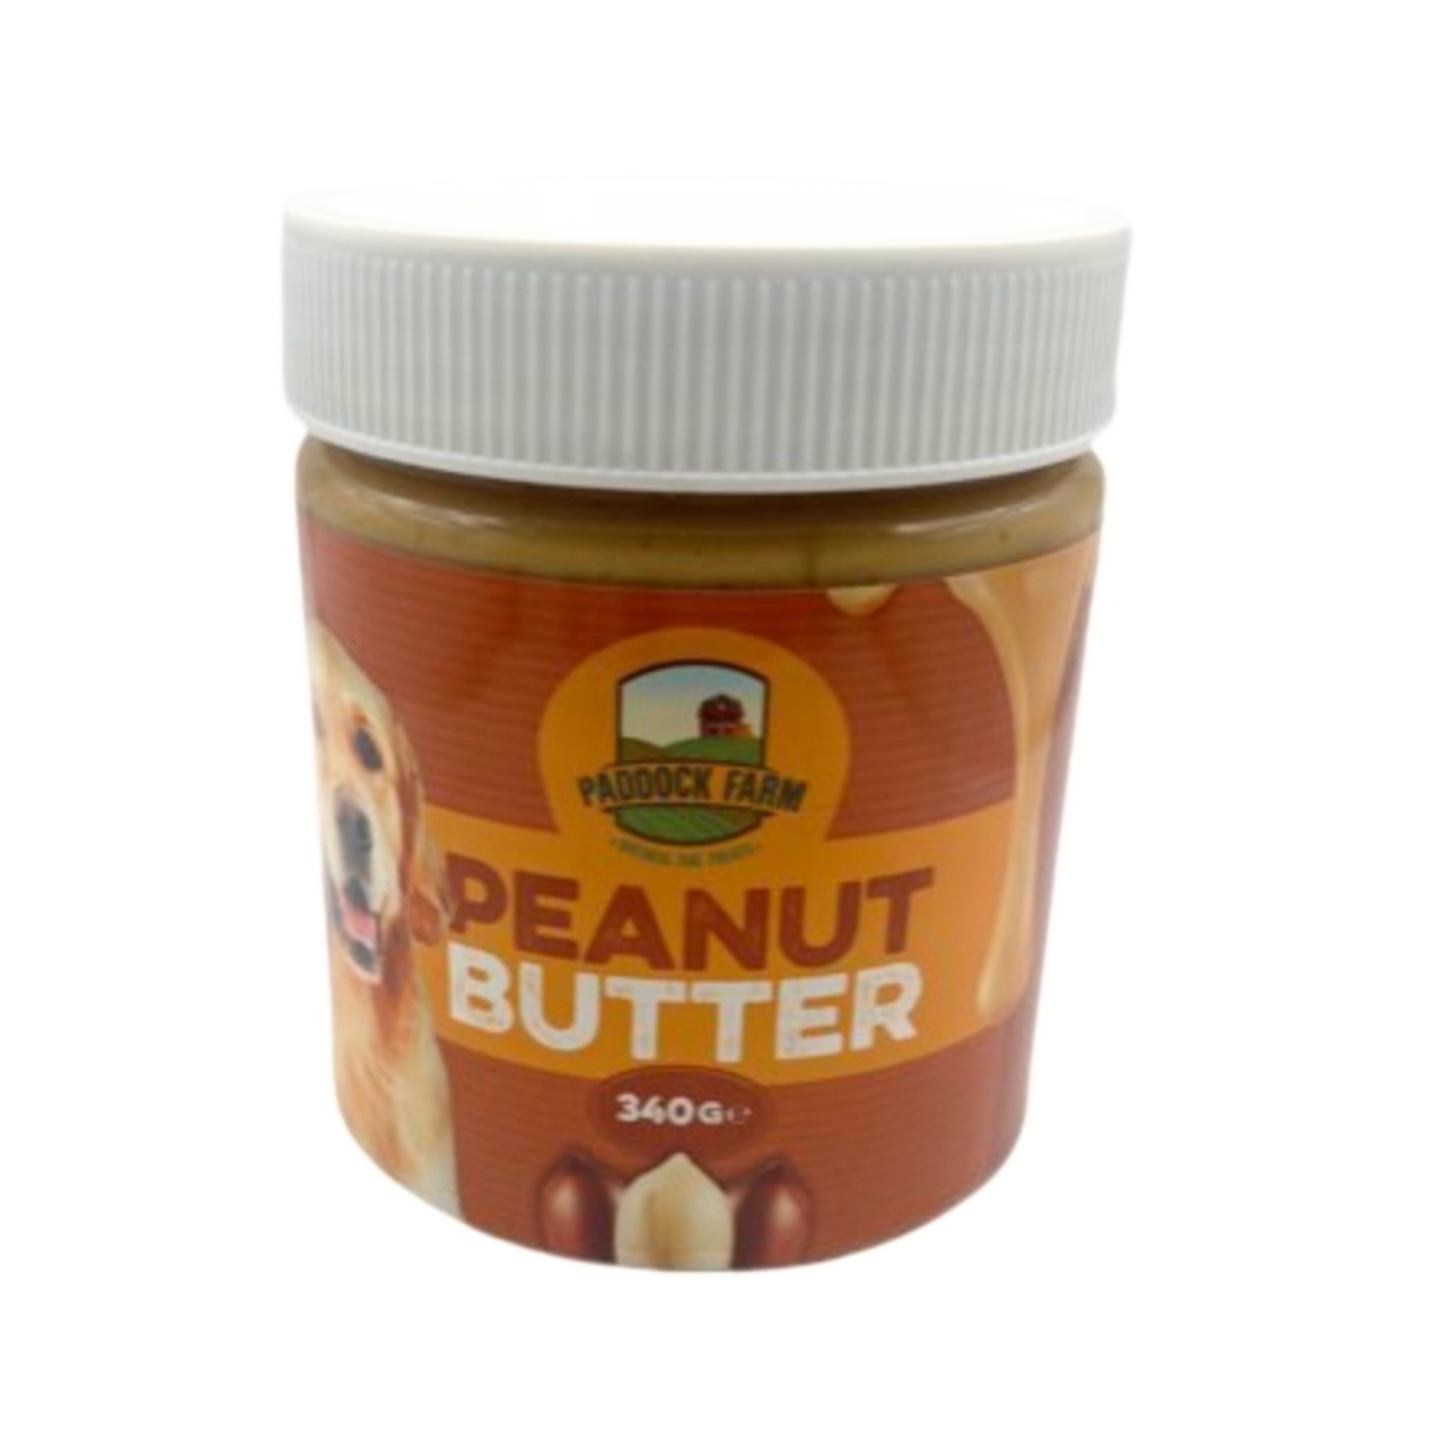 Paddock Farm Peanut Butter Safe for Dogs 340g